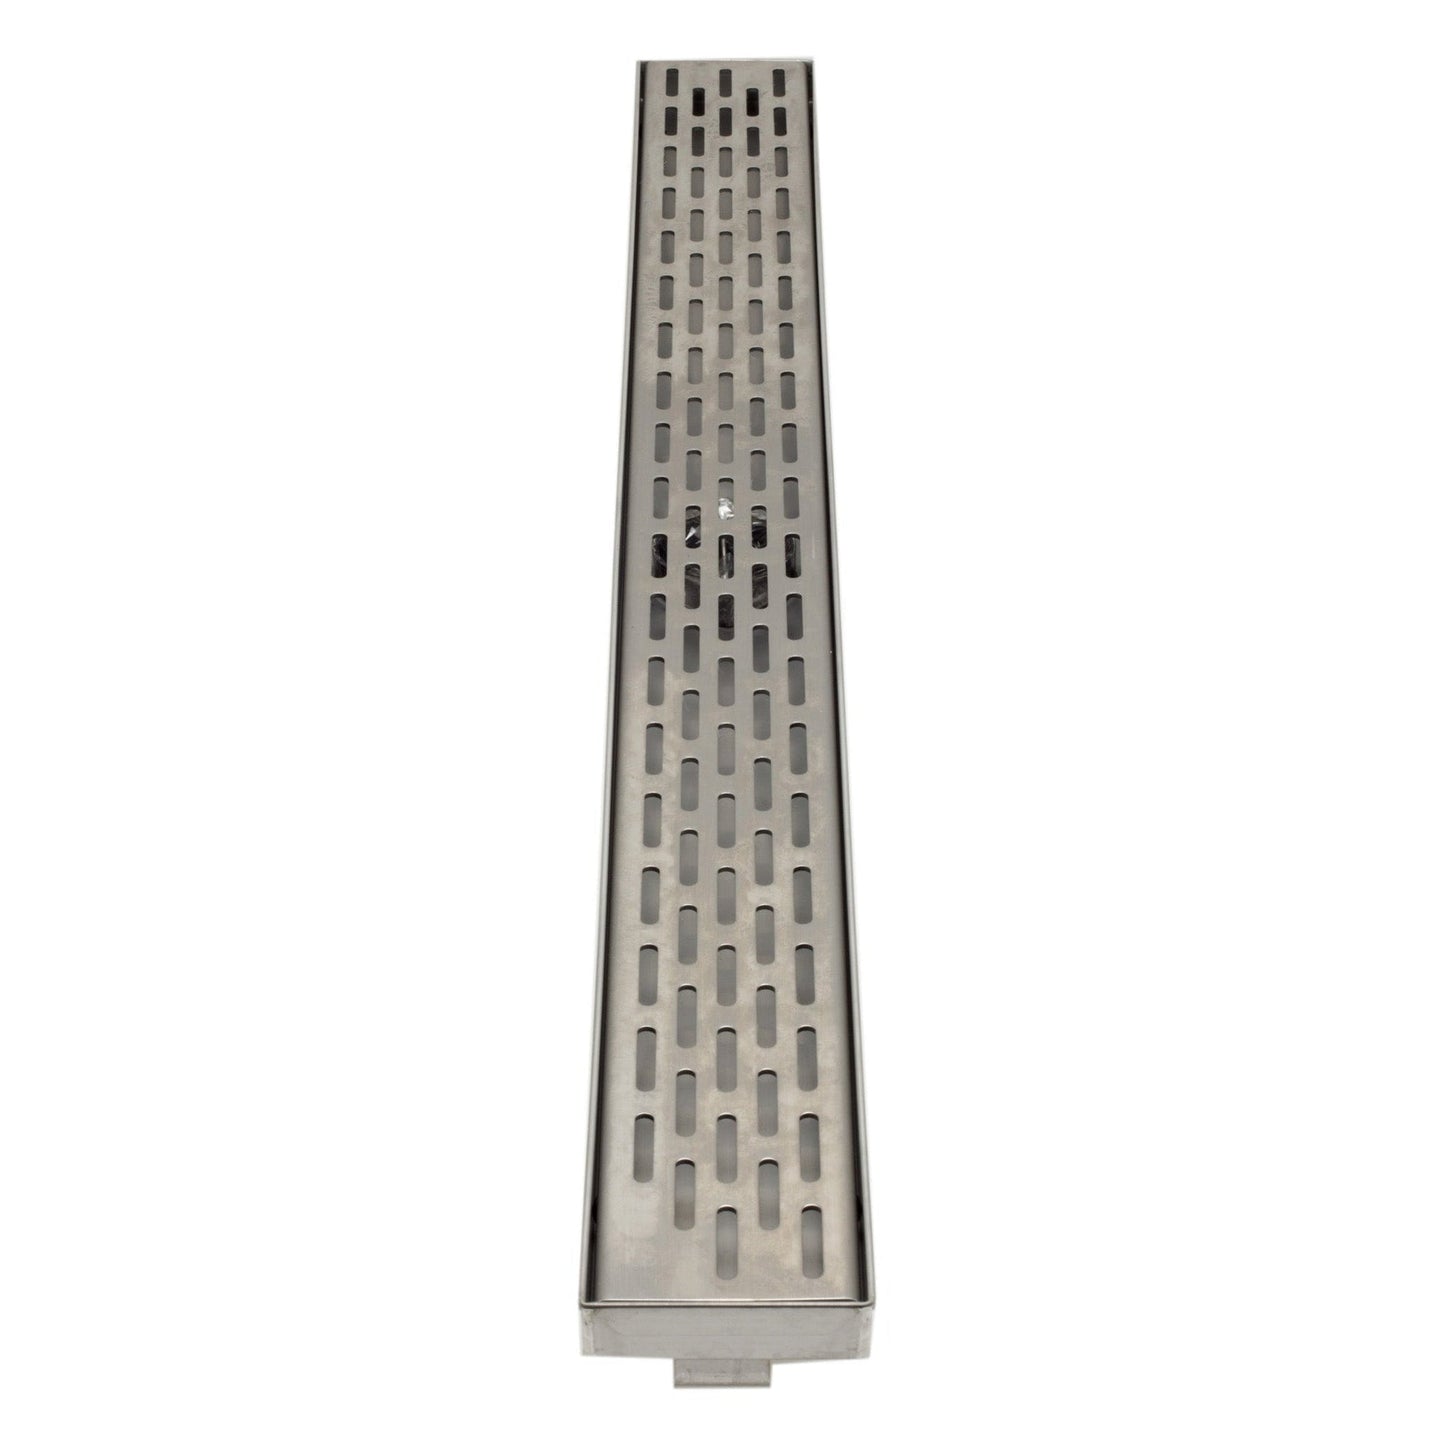 ALFI Brand ABLD32C-BSS 32" Brushed Stainless Steel Rectangle Linear Shower Drain With Groove Holes